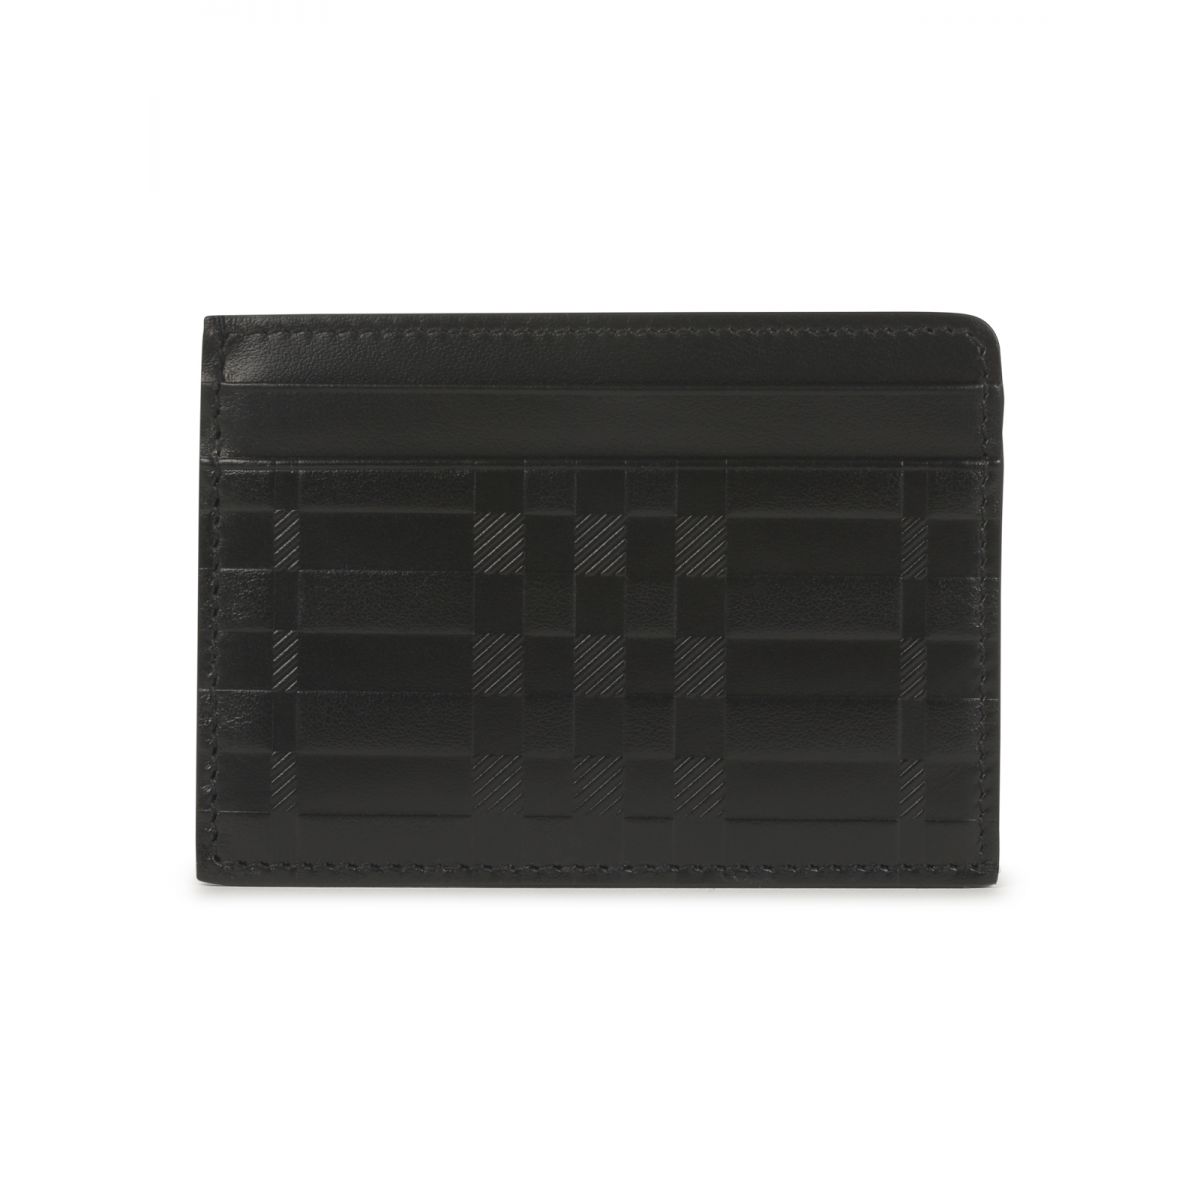 BURBERRY - Card holder in embossed checkered leather